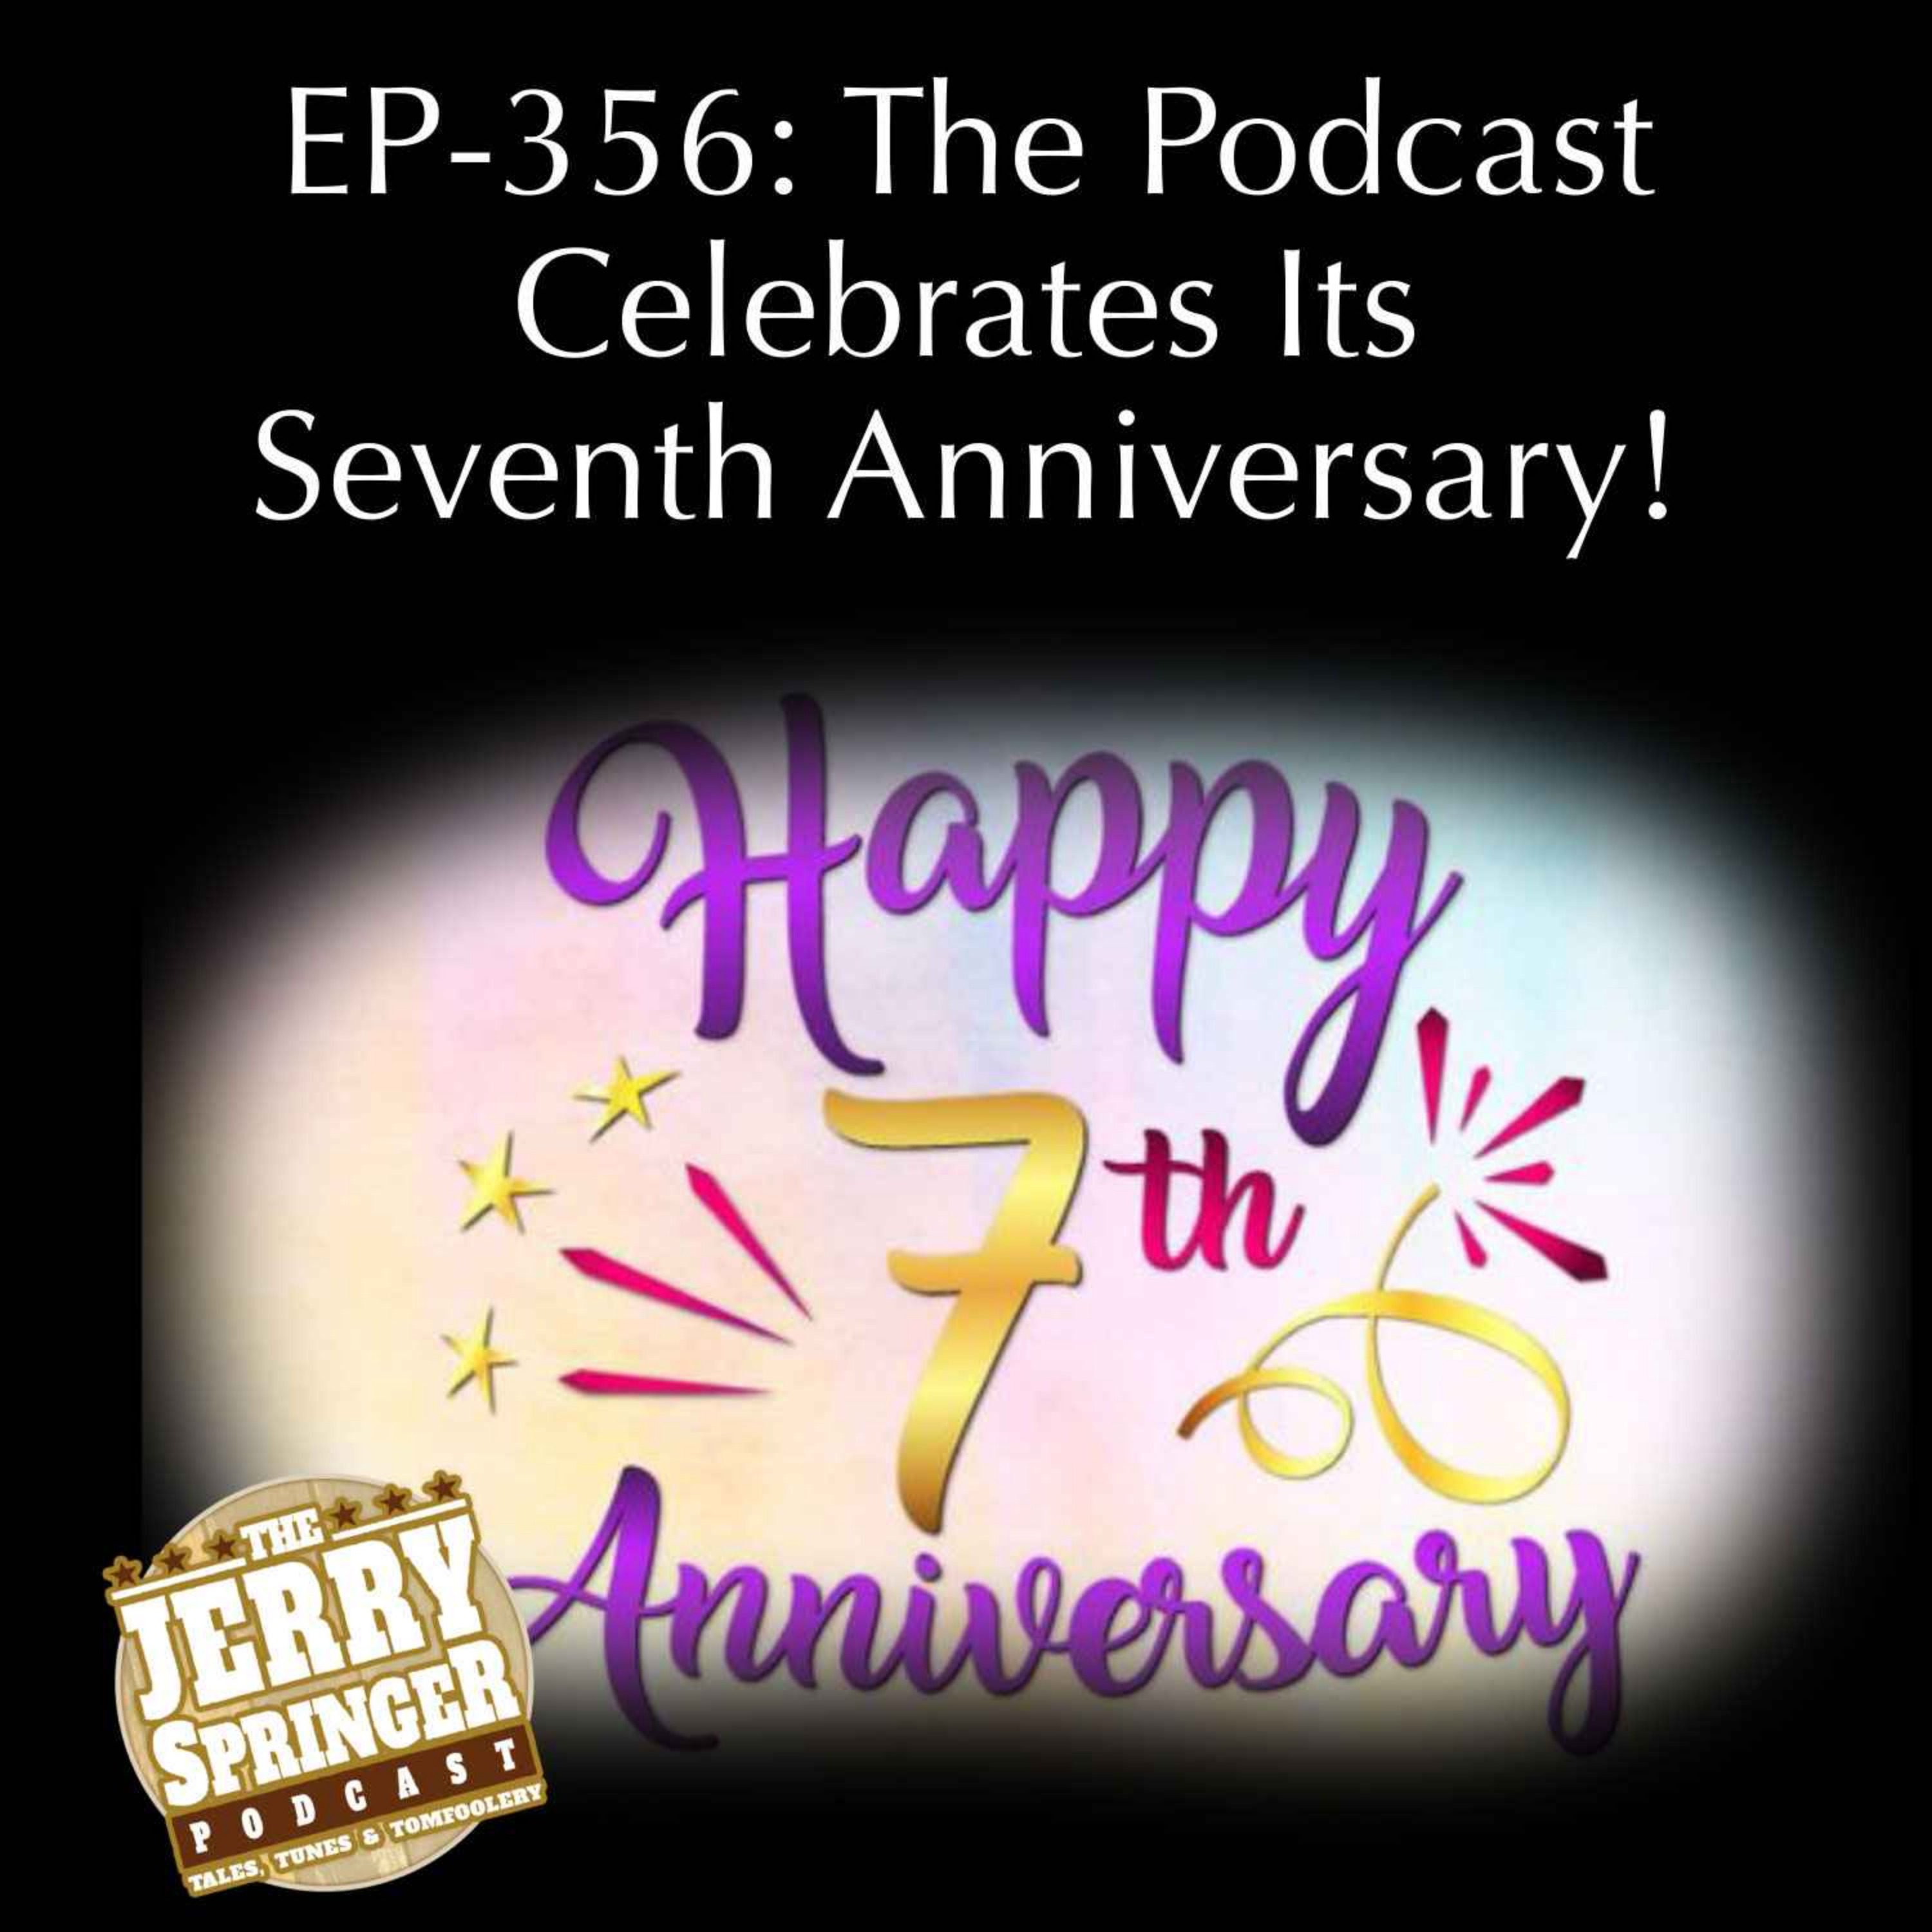 The Podcast Celebrates Its Seventh Anniversary! EP - 356